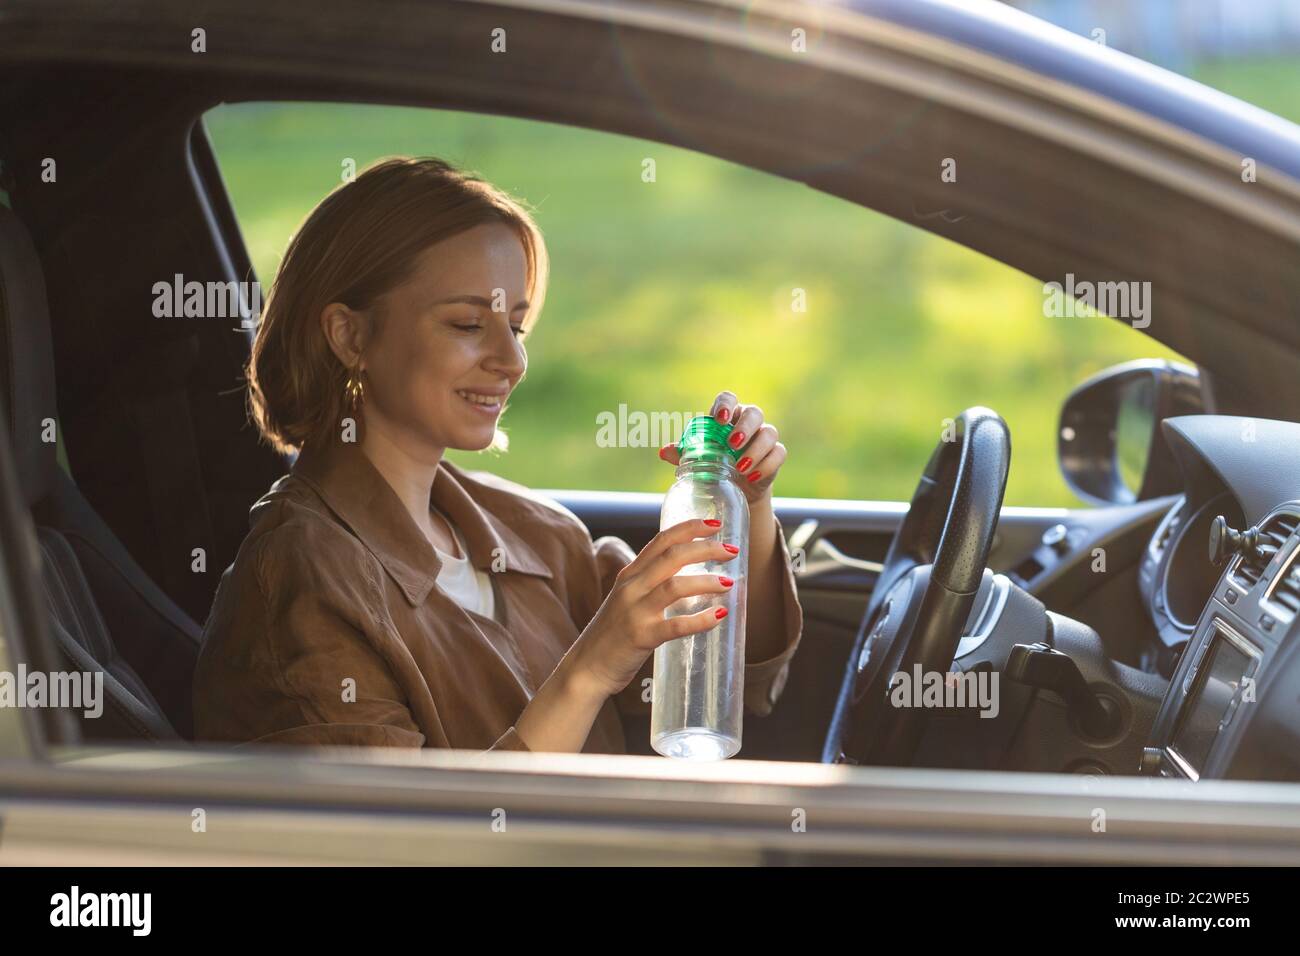 Woman driver drinks water from a refillable bottle in her car, thirsty behind the wheel, stopped to rest. Stock Photo